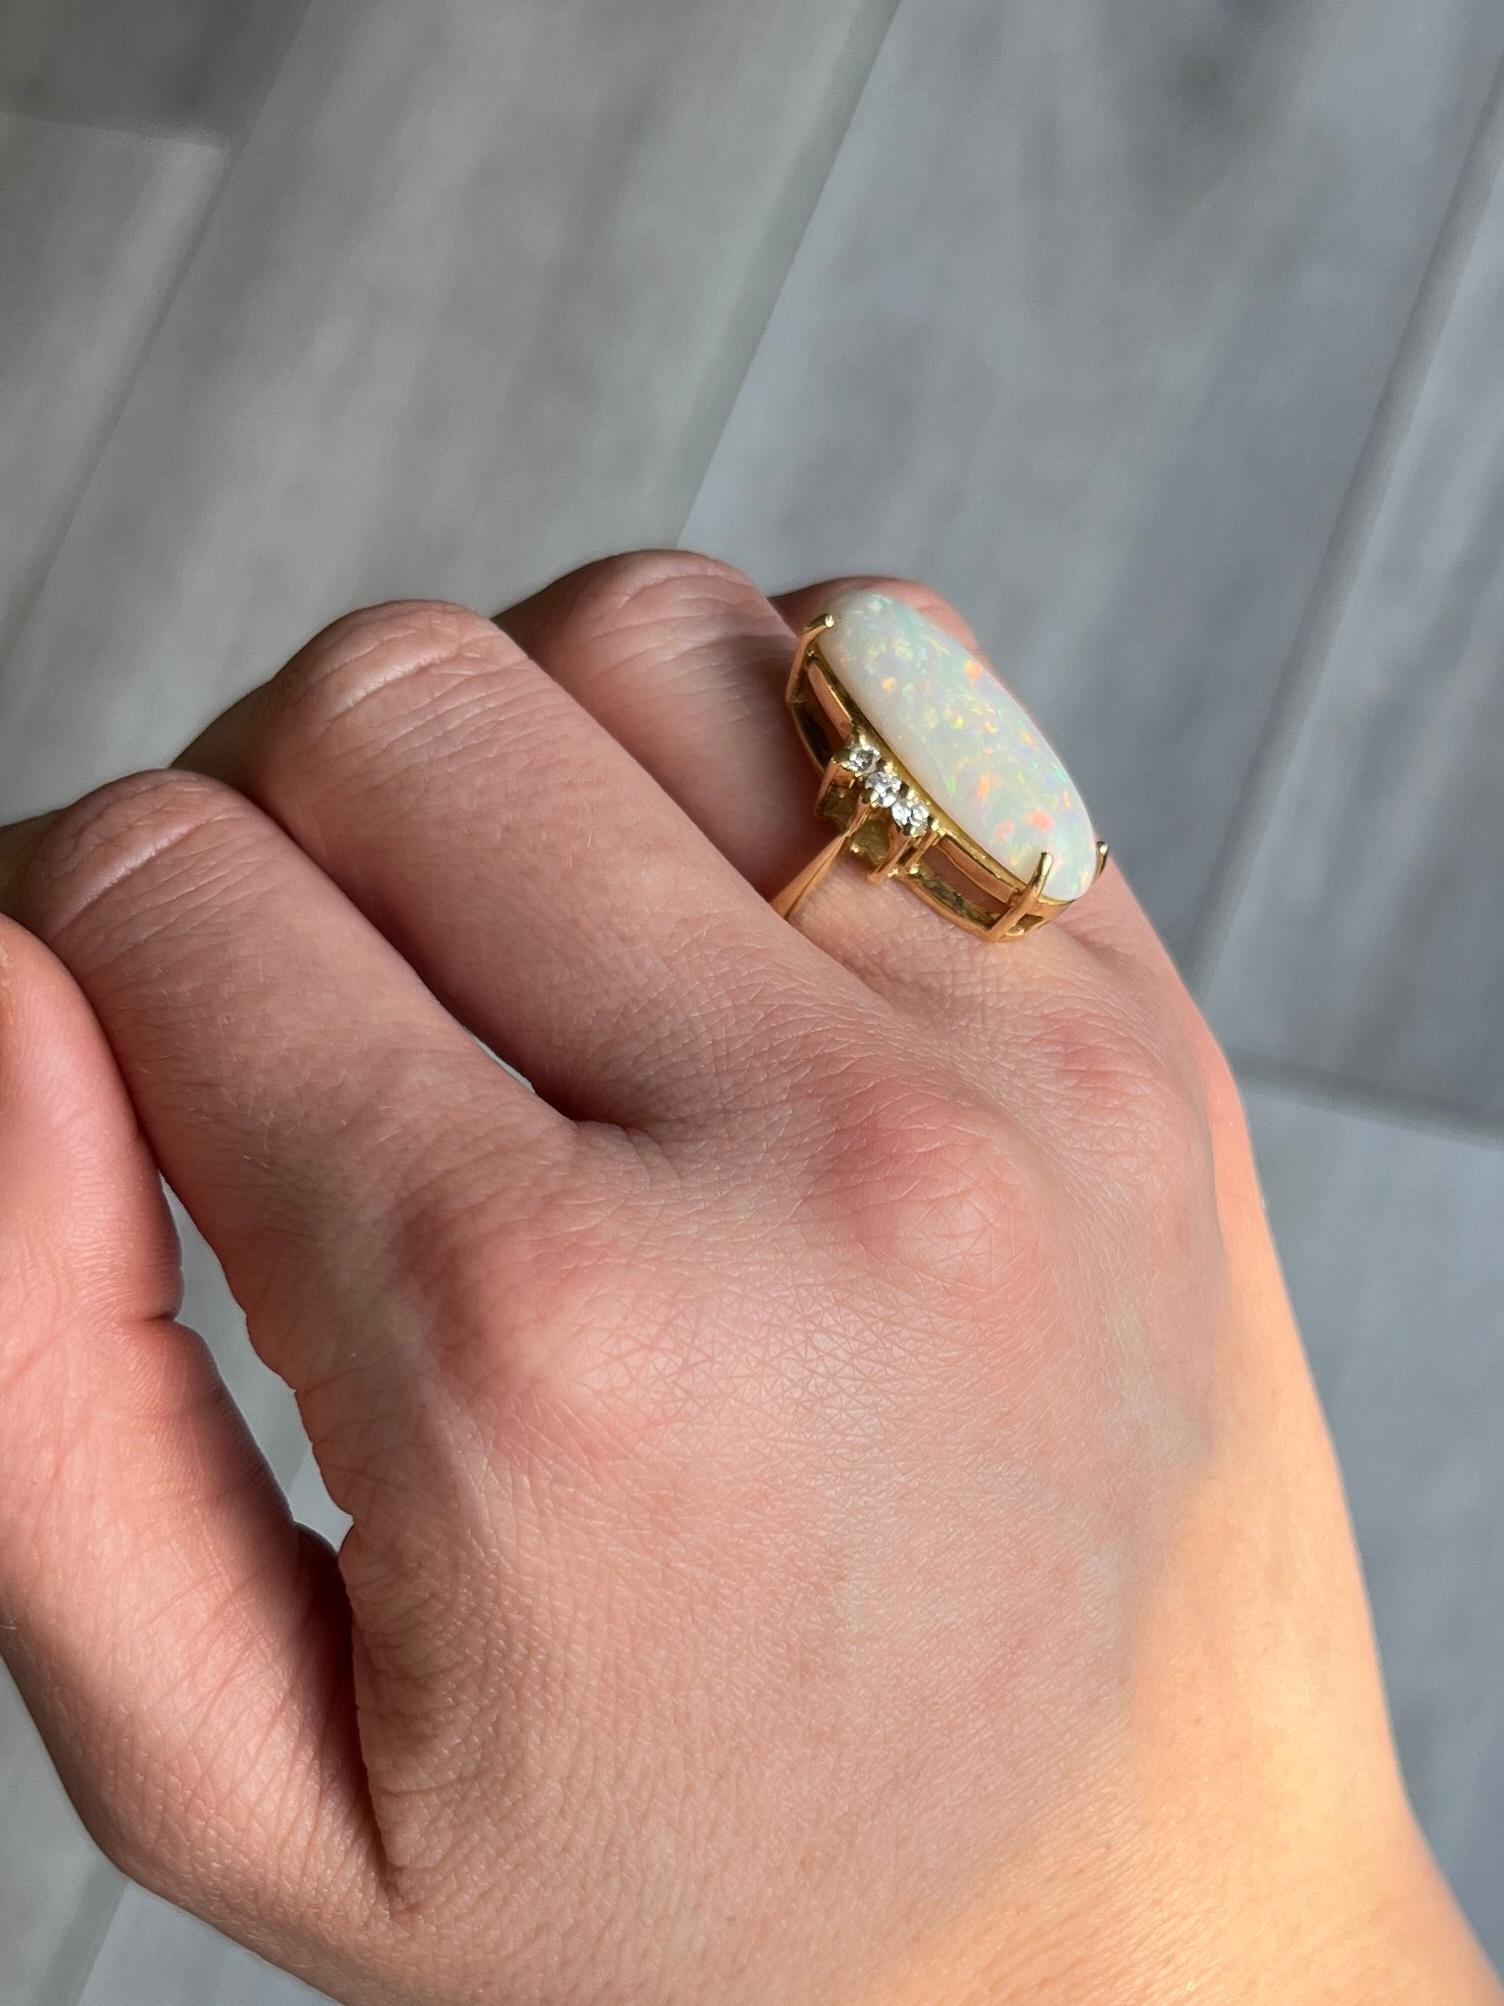 The opal is pale in colour and has lots of flashes of red and all other colours within it. The diamonds either side of the opal total 15pts each side. The ring itself is modelled in 18ct gold. London 1972.

Ring Size: K 1/2 or 5 1/2 
Height off